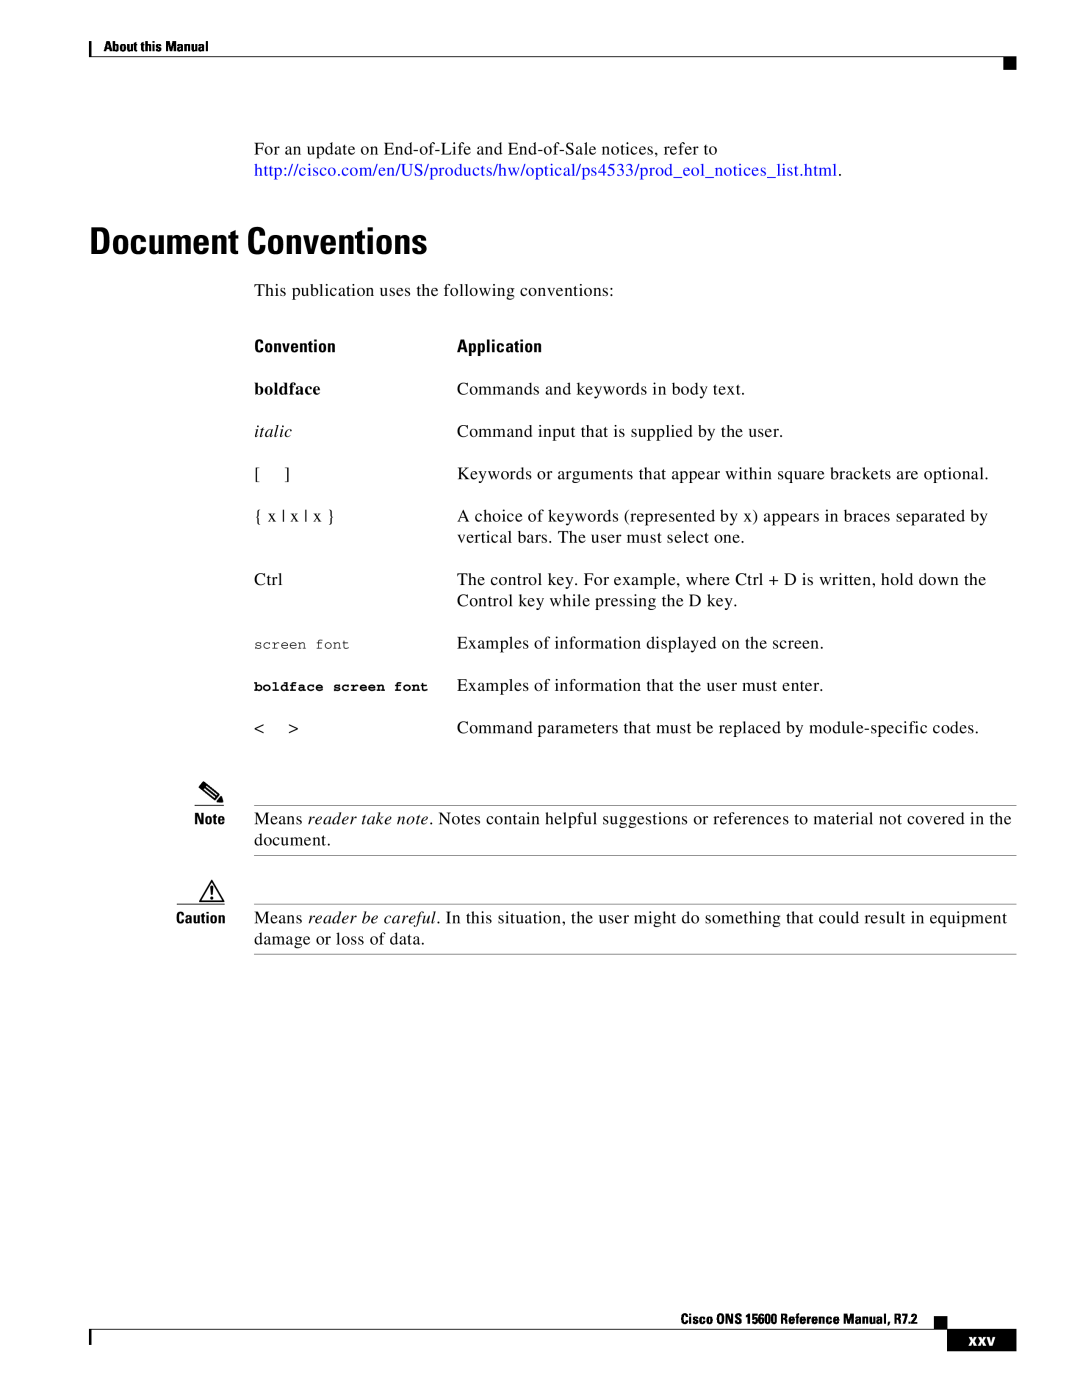 Cisco Systems ONS 15600 manual Document Conventions, italic, Application, boldface 